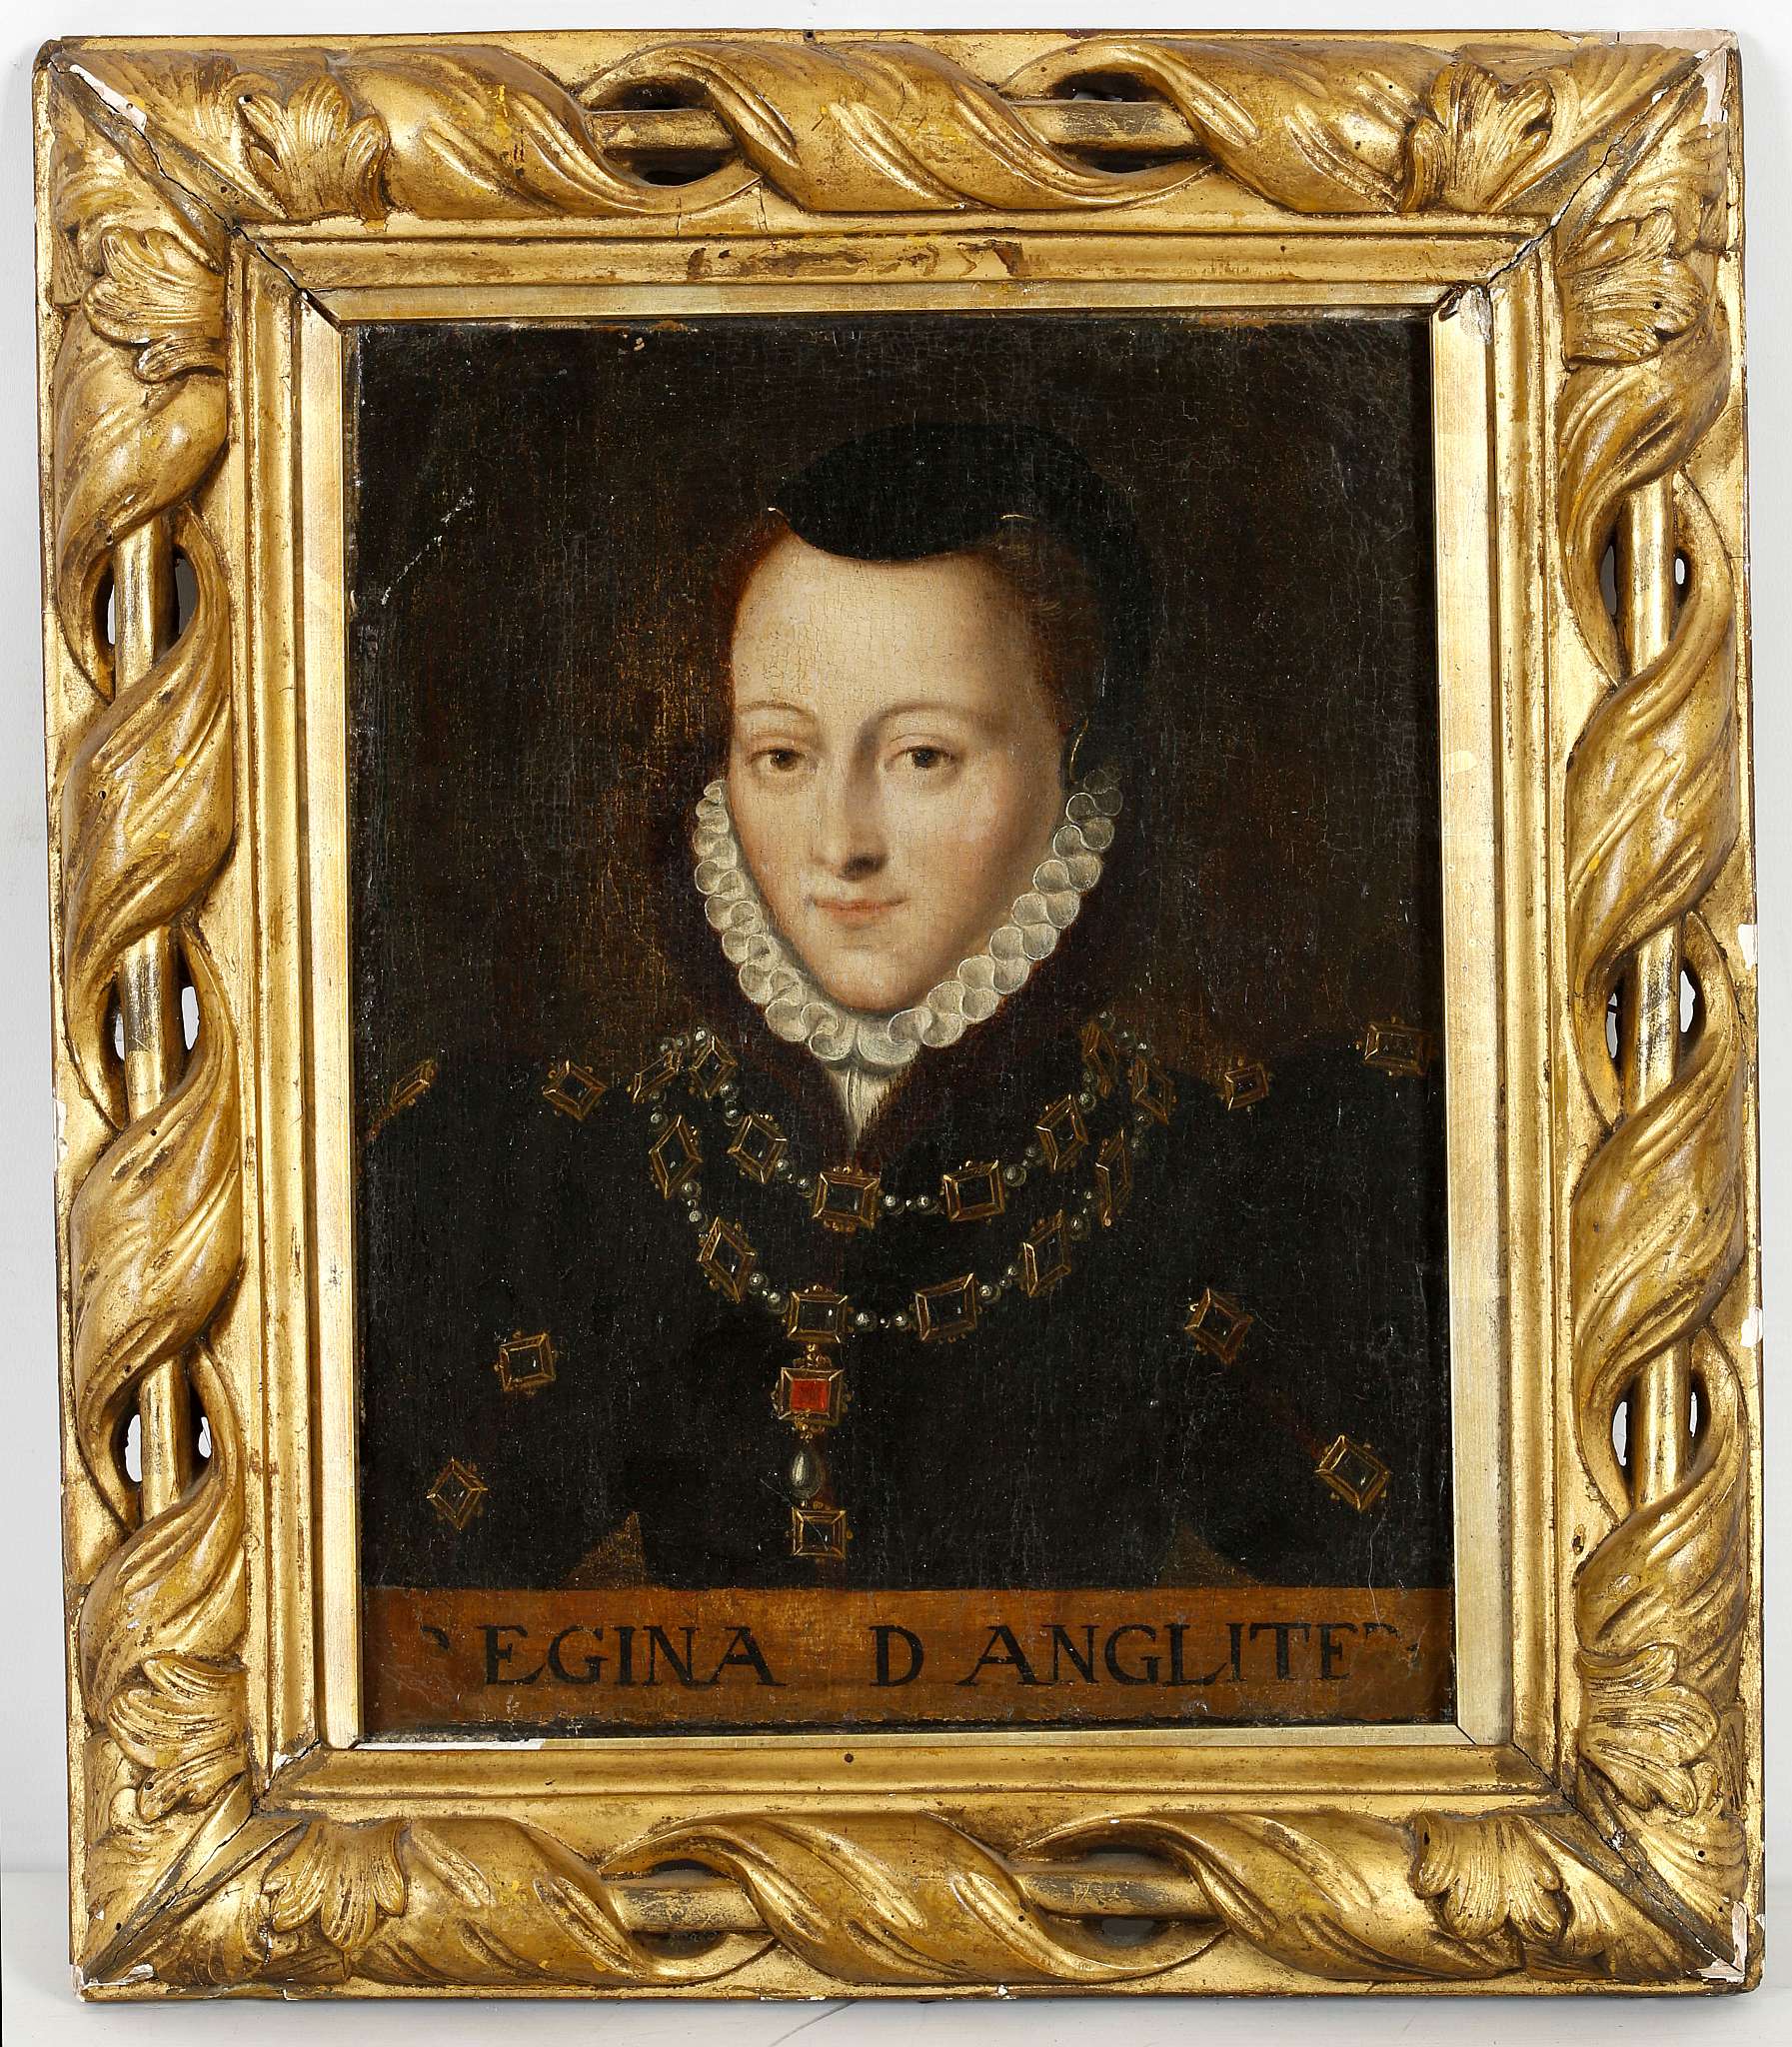 Studio of François Clouet (French; 1520-1572), Mary Queen of Scots, circa 1558/1560, with the